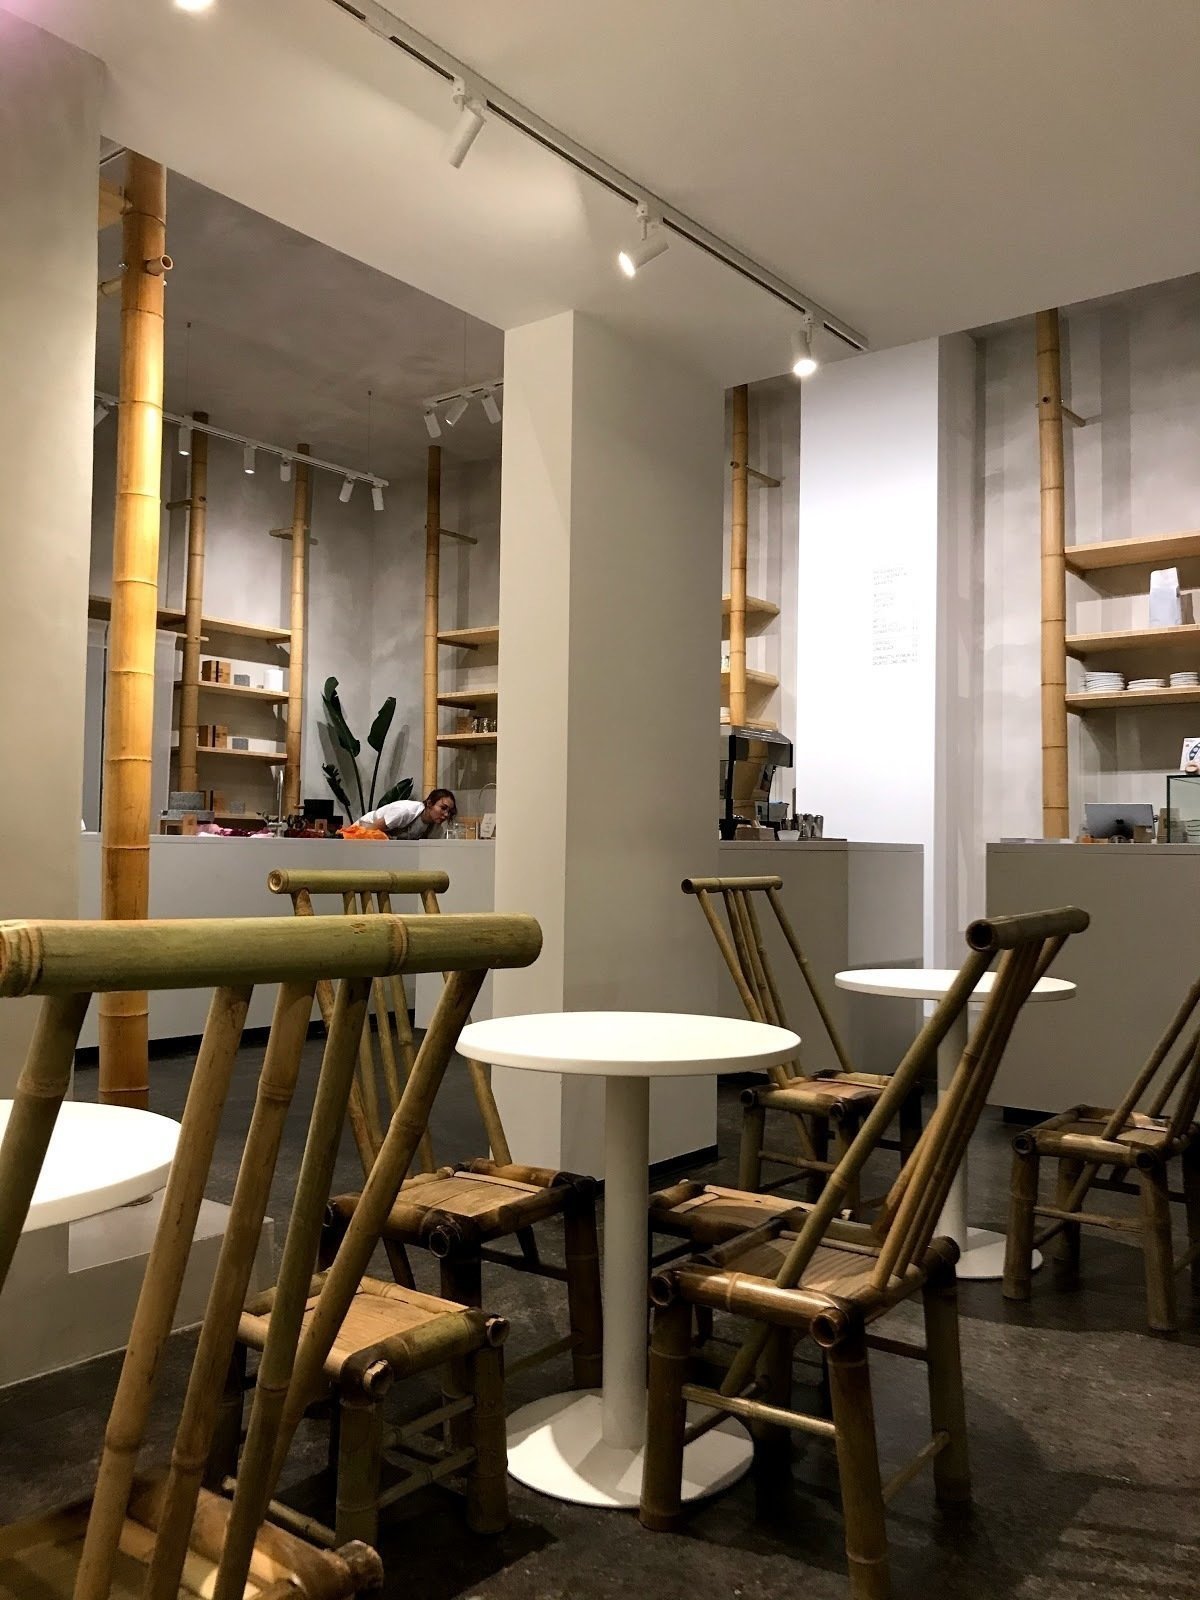 <span class="translation_missing" title="translation missing: en.meta.location_title, location_name: HUADOU Soy Concept Store, city: Berlin">Location Title</span>